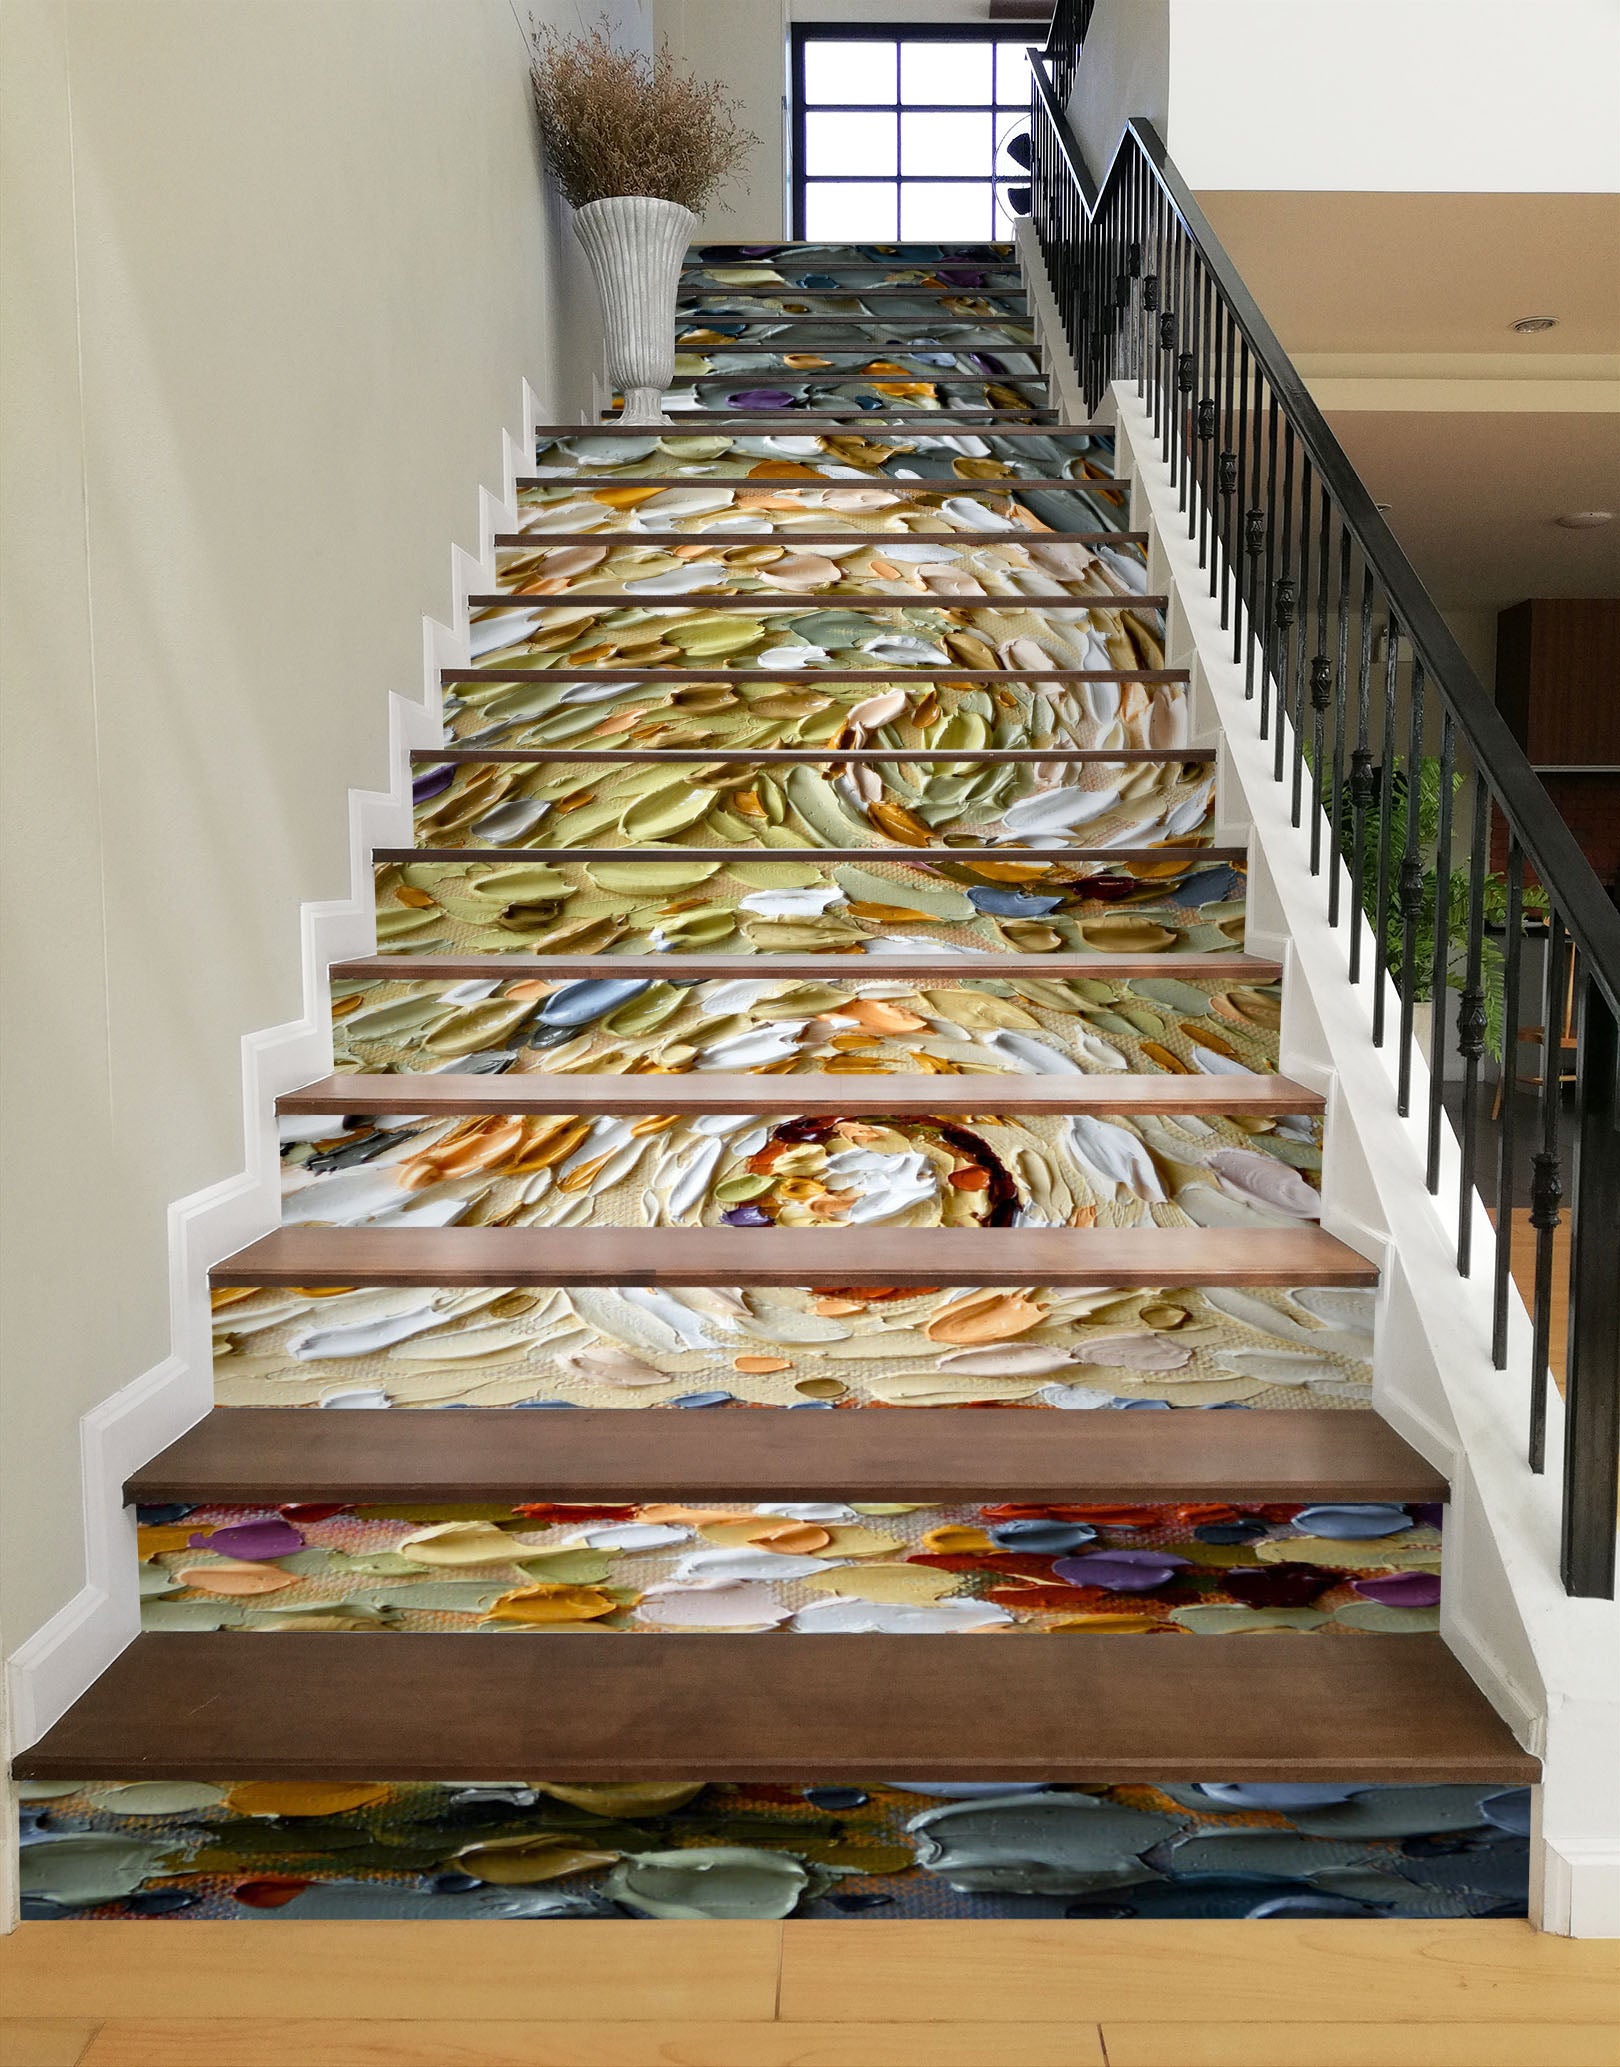 3D Pigment Like Stone 396 Dena Tollefson Stair Risers